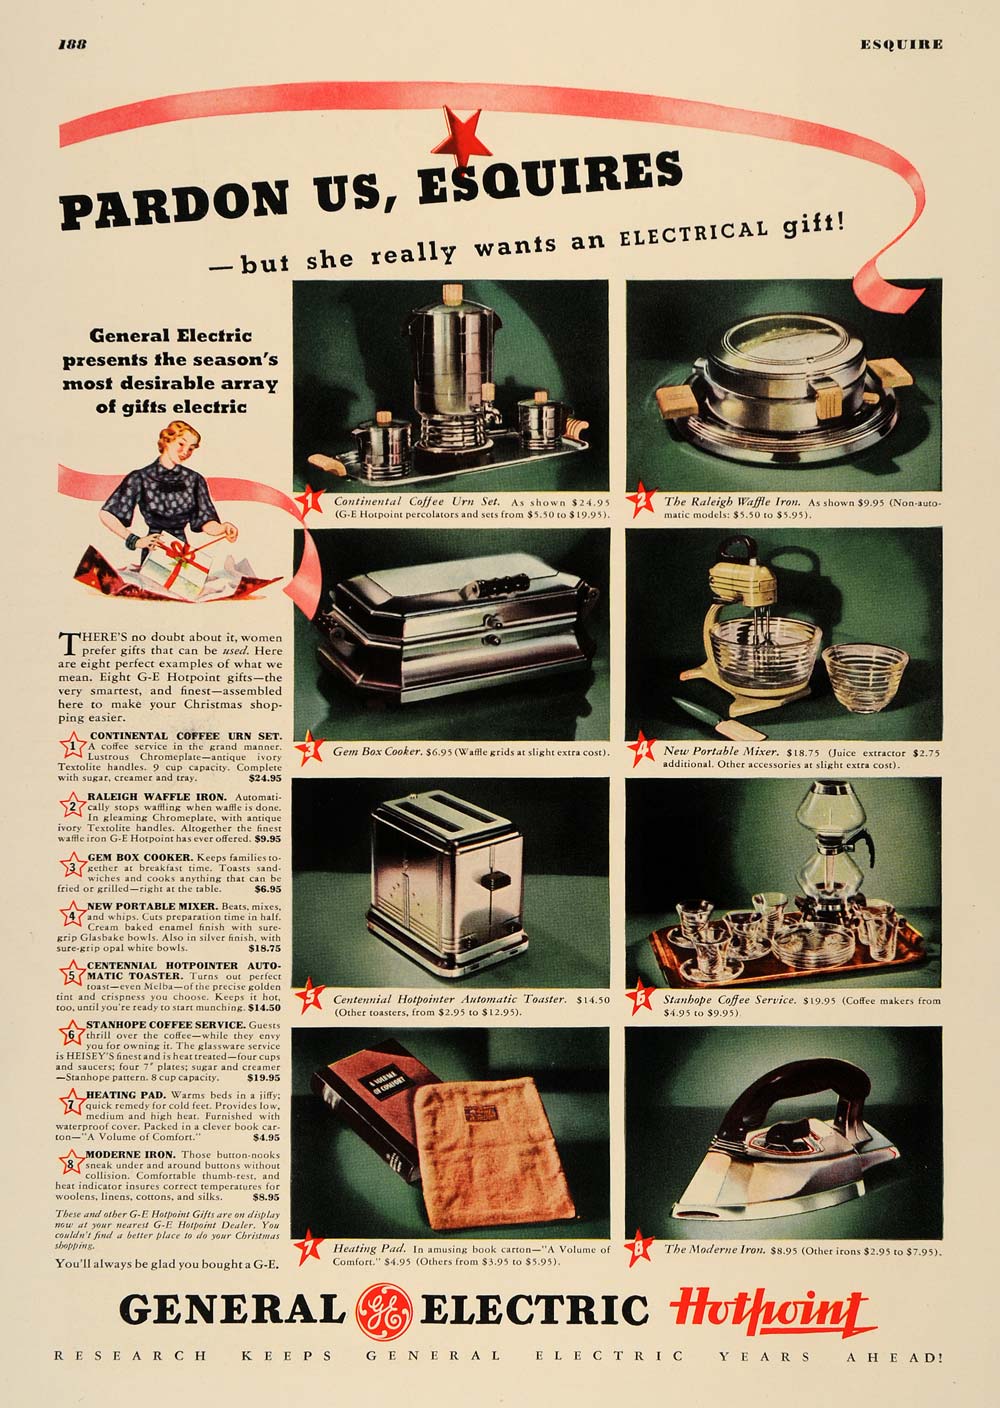 1936 Ad General Electric Kitchen Appliances Housewife - ORIGINAL